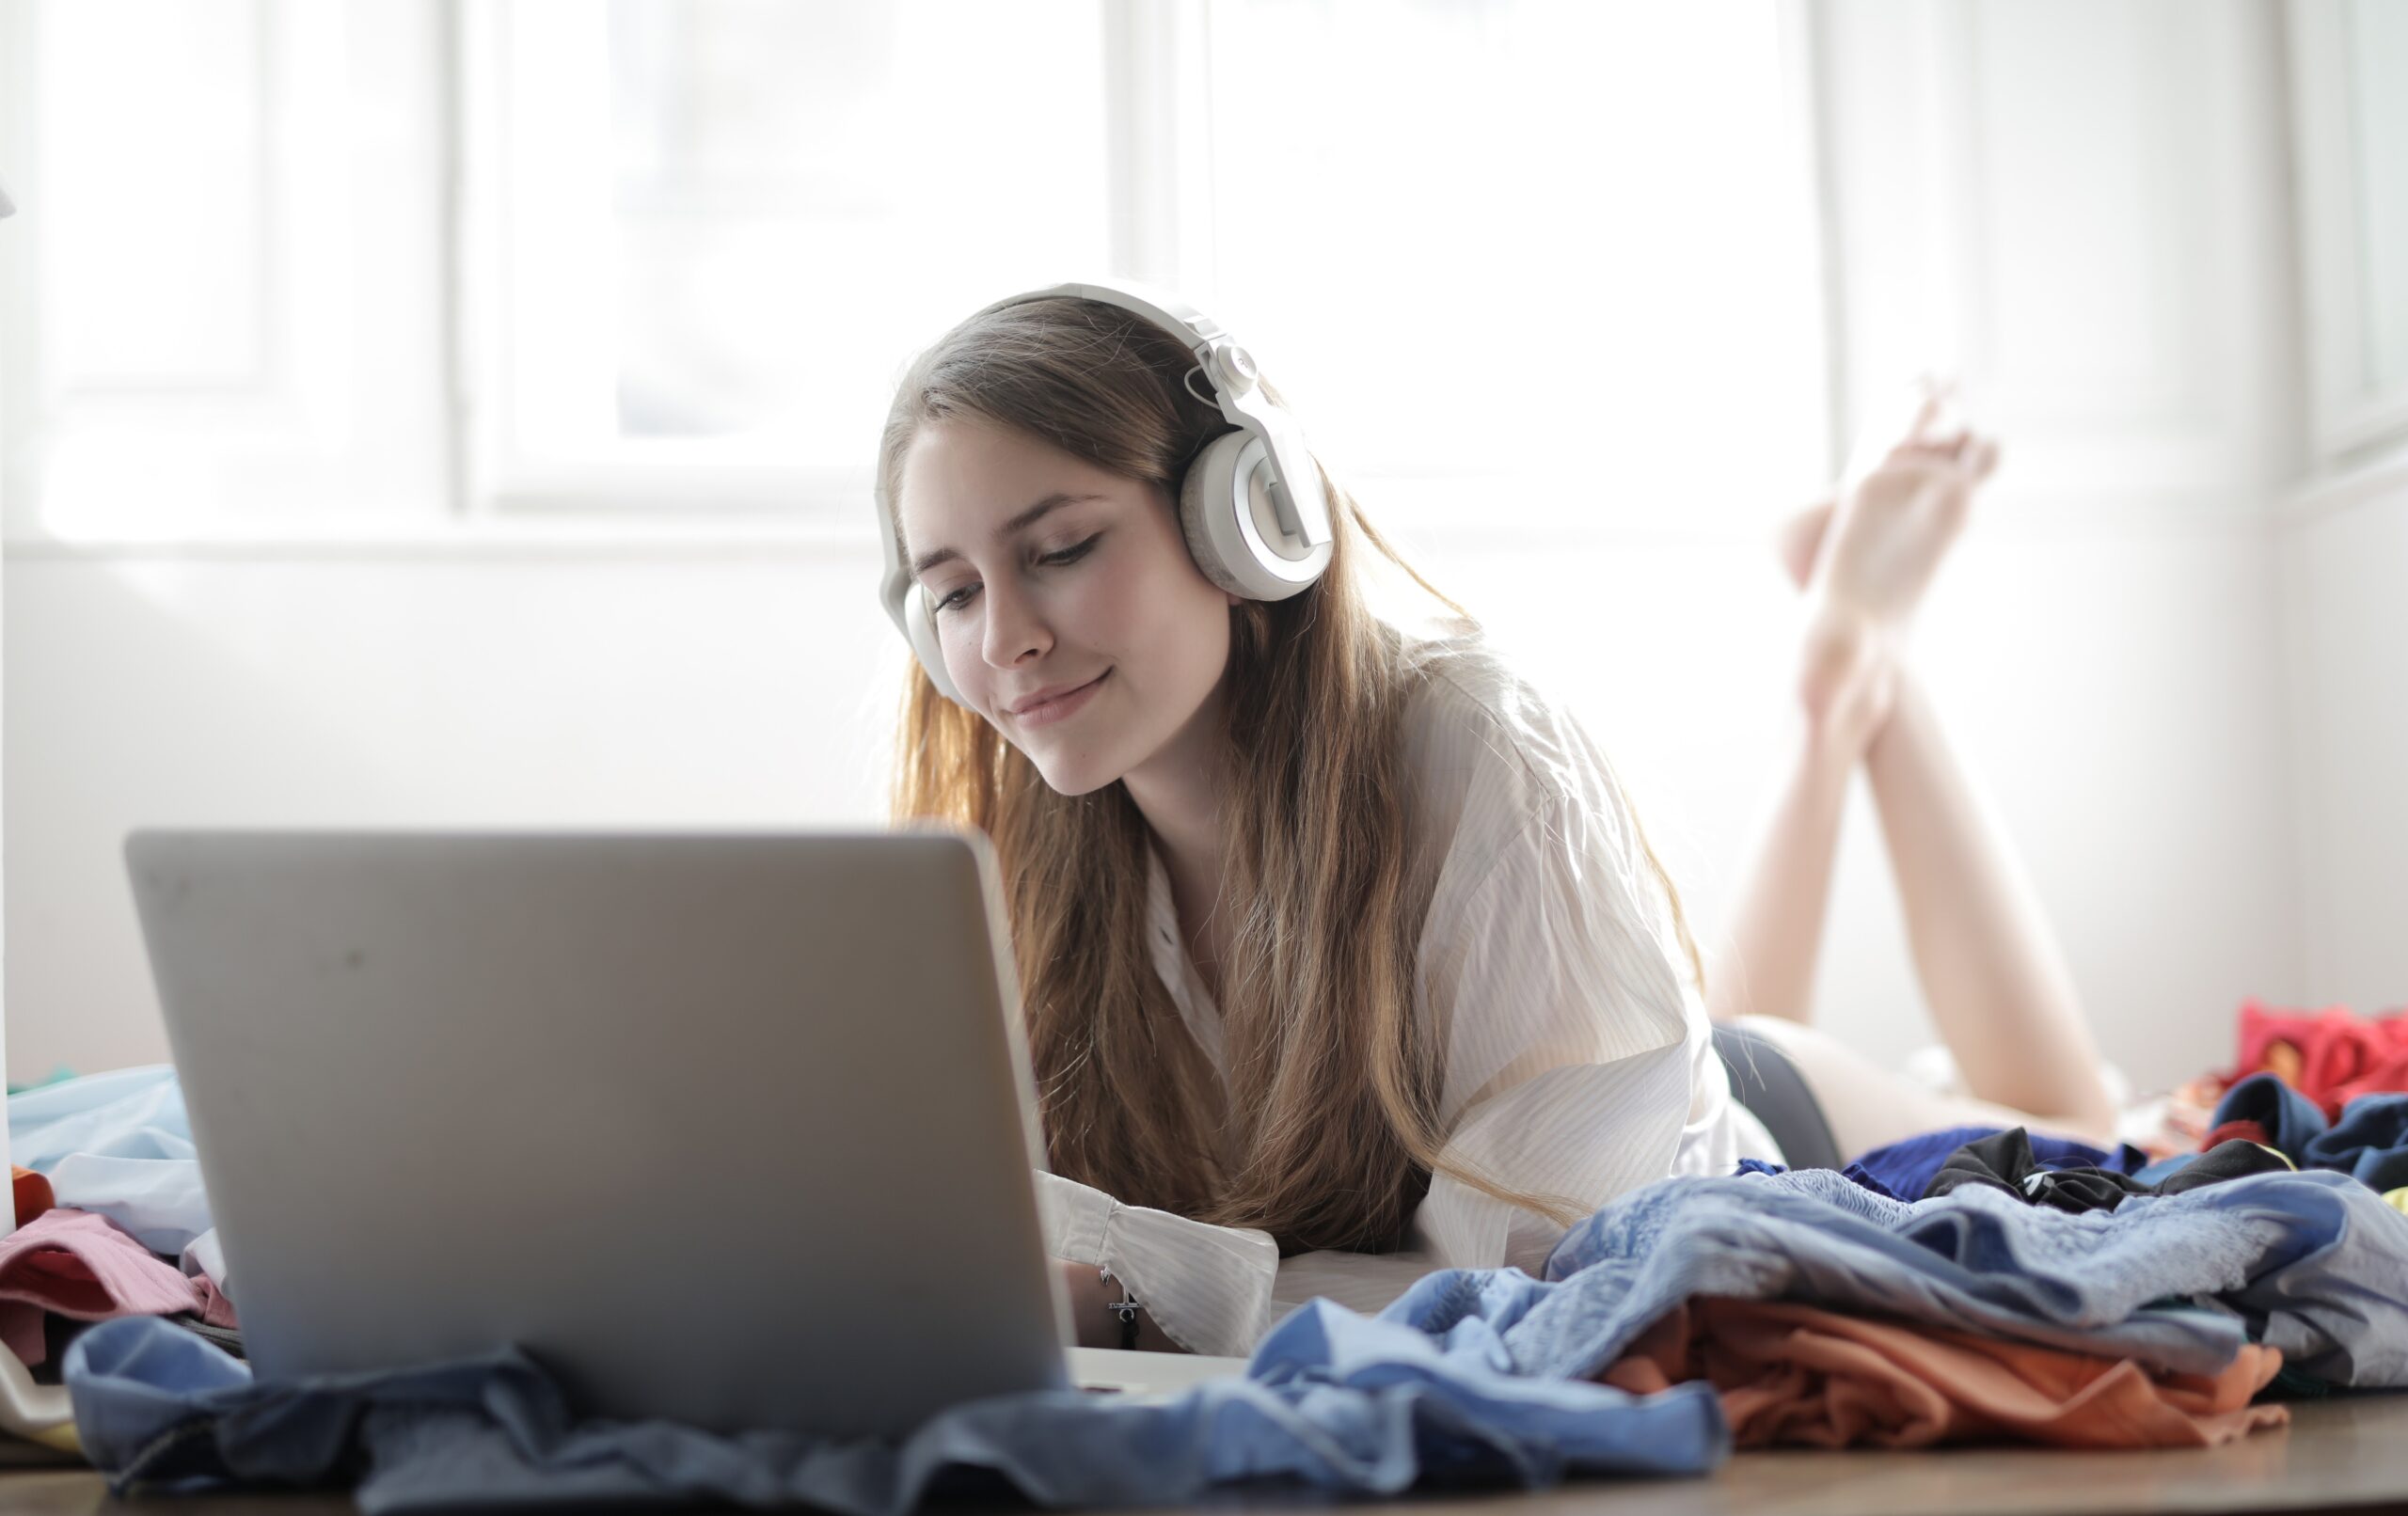 Top 15 Free Music Apps That Don’t Need Wi-Fi